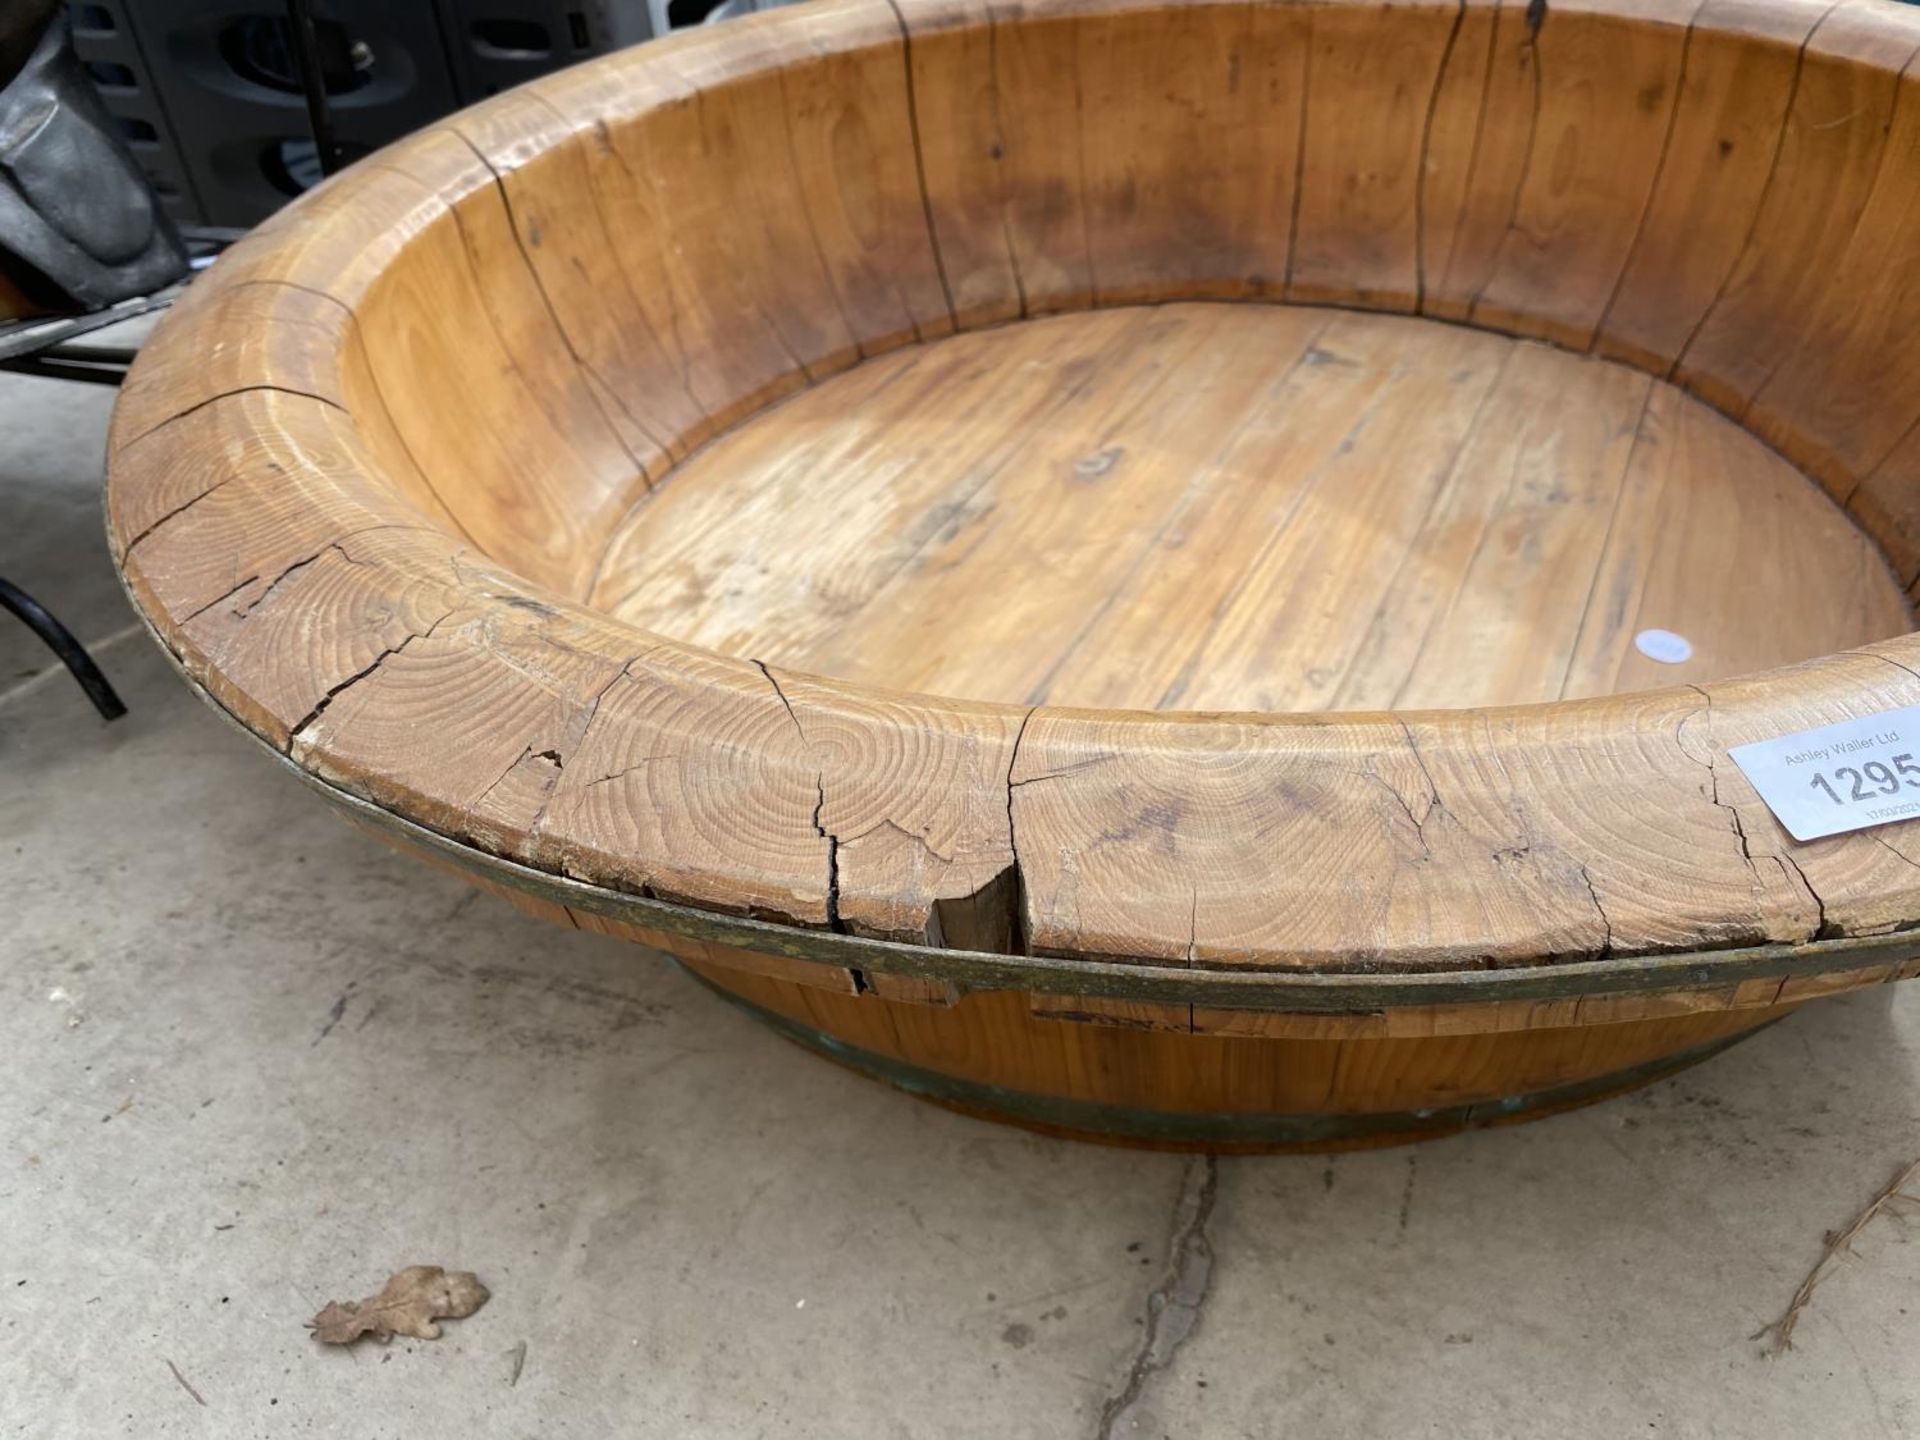 A LARGE WOODEN BOWL WITH METAL BANDING - Image 2 of 5